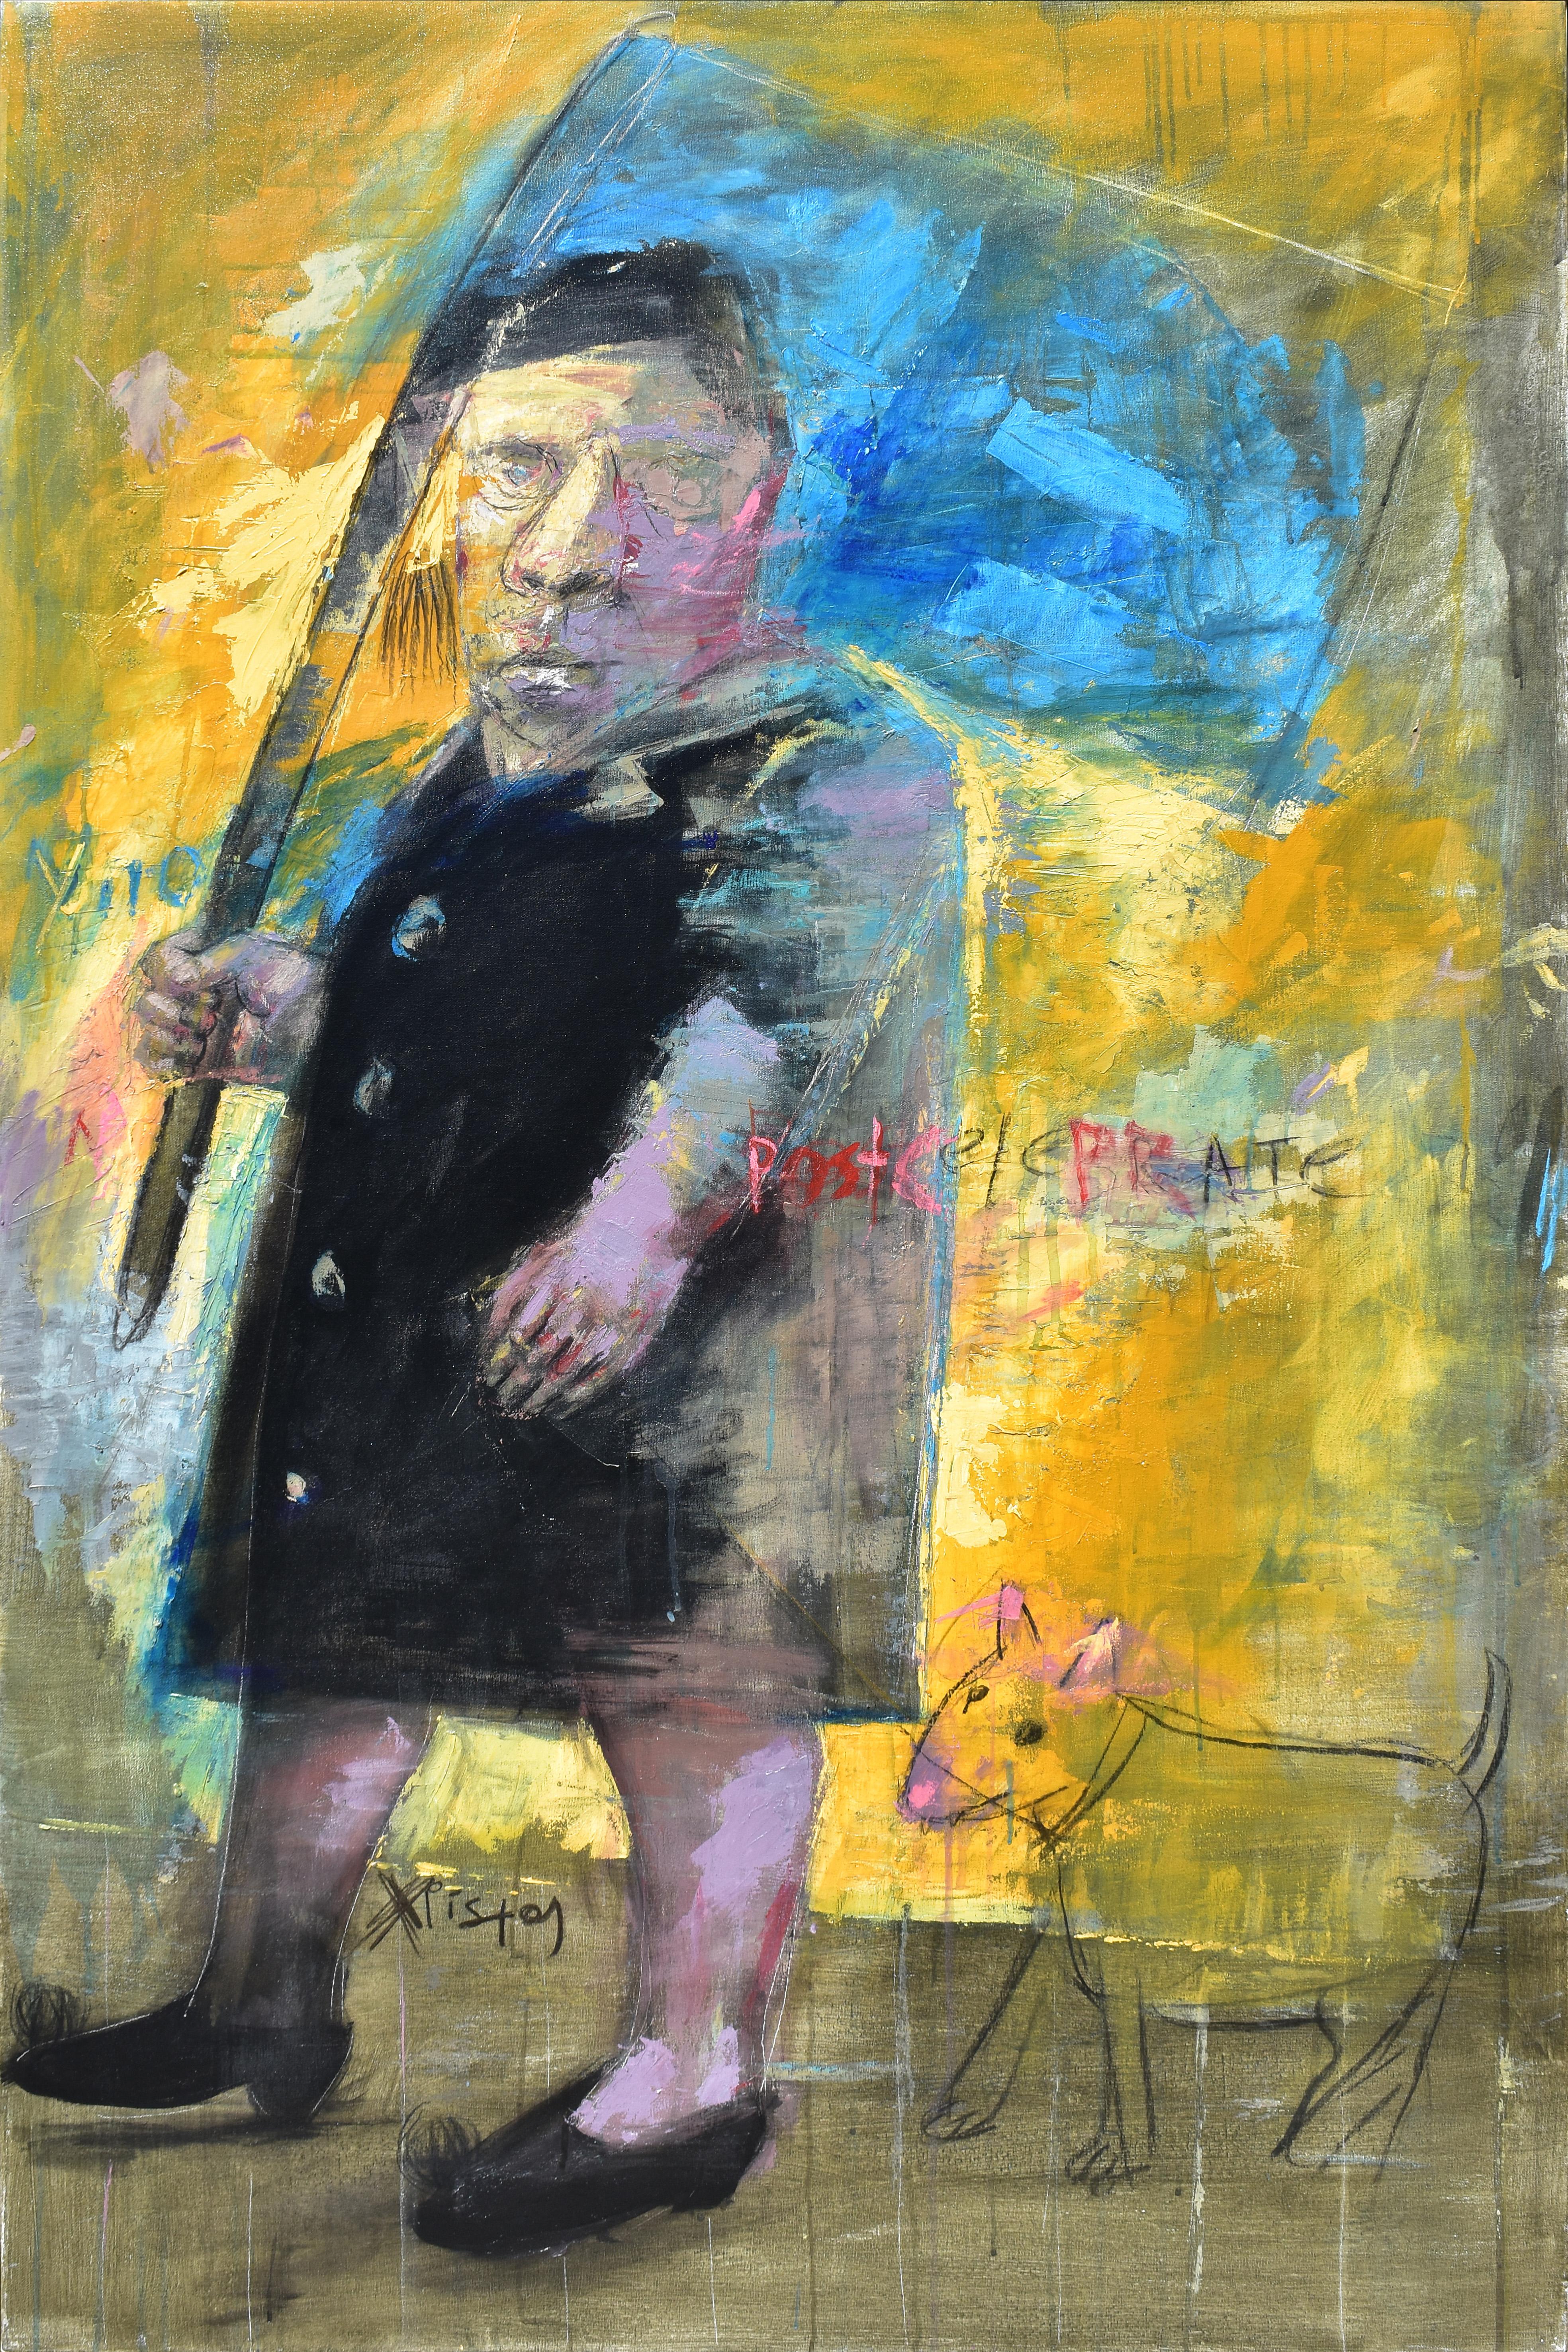 "Standard bearer 11" is a painting by Maestro Christos Antonaropoulos
About the artwork:

TECHNIQUE:  oil painting on canvas
STYLE:   Impressionist, Contemporary
Edition : Unique, signed
Weight: Approximately 3 kg.
The painting is unframed

The